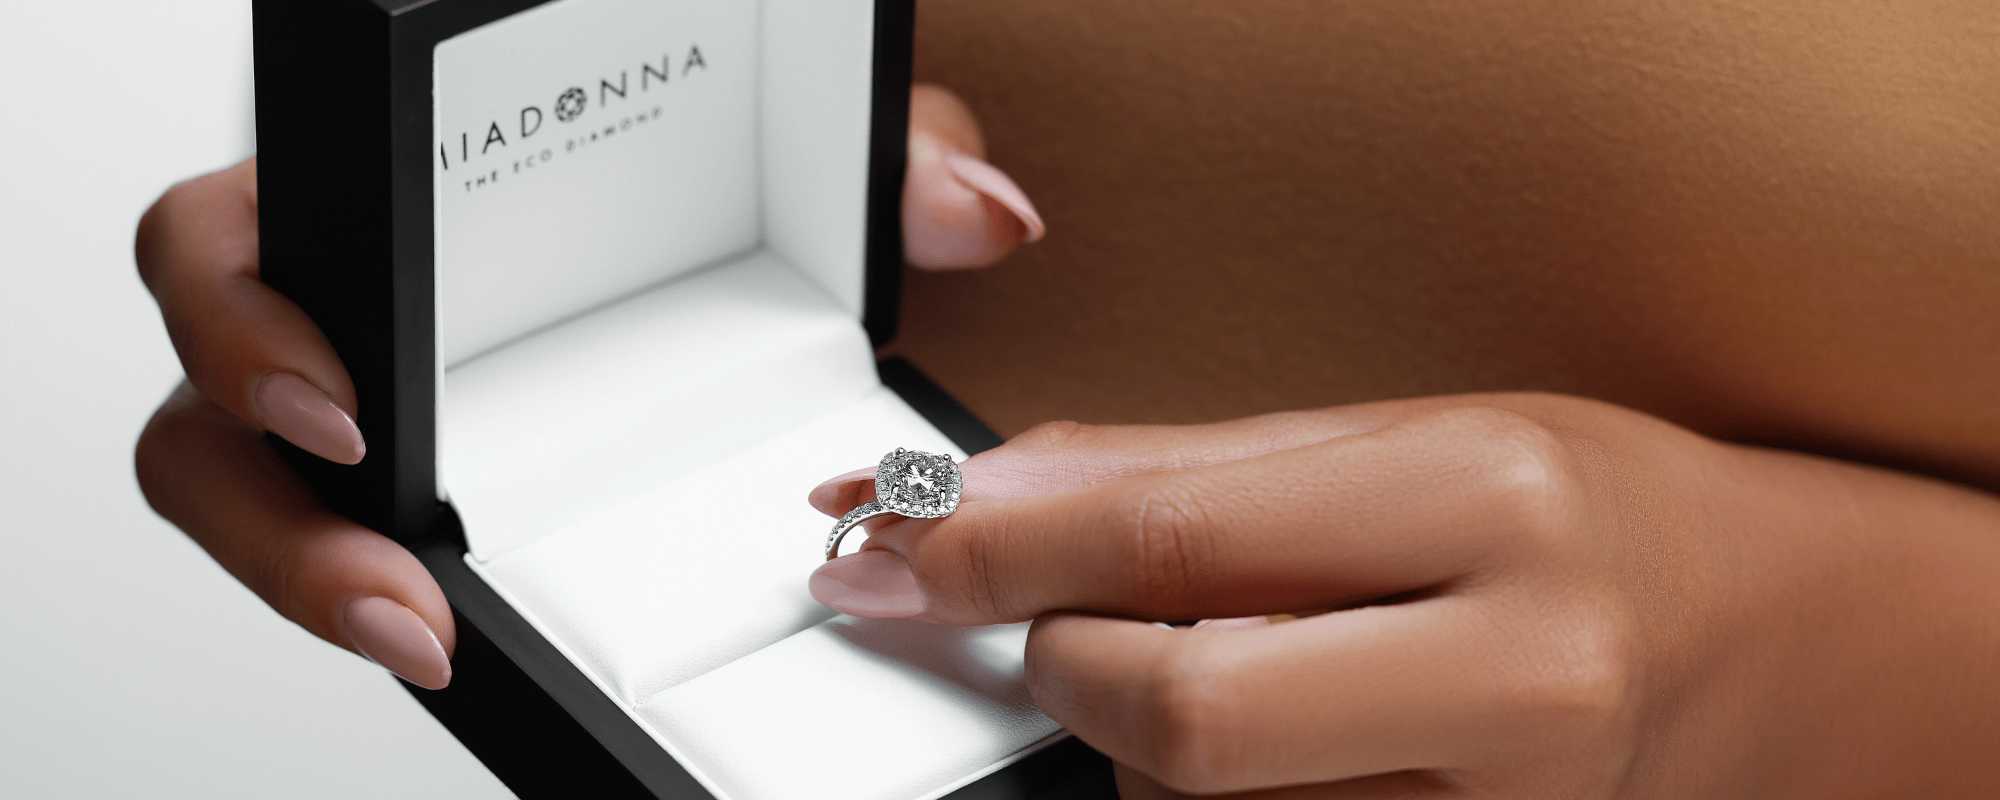 How to clean wedding and engagement rings at home - expert tips